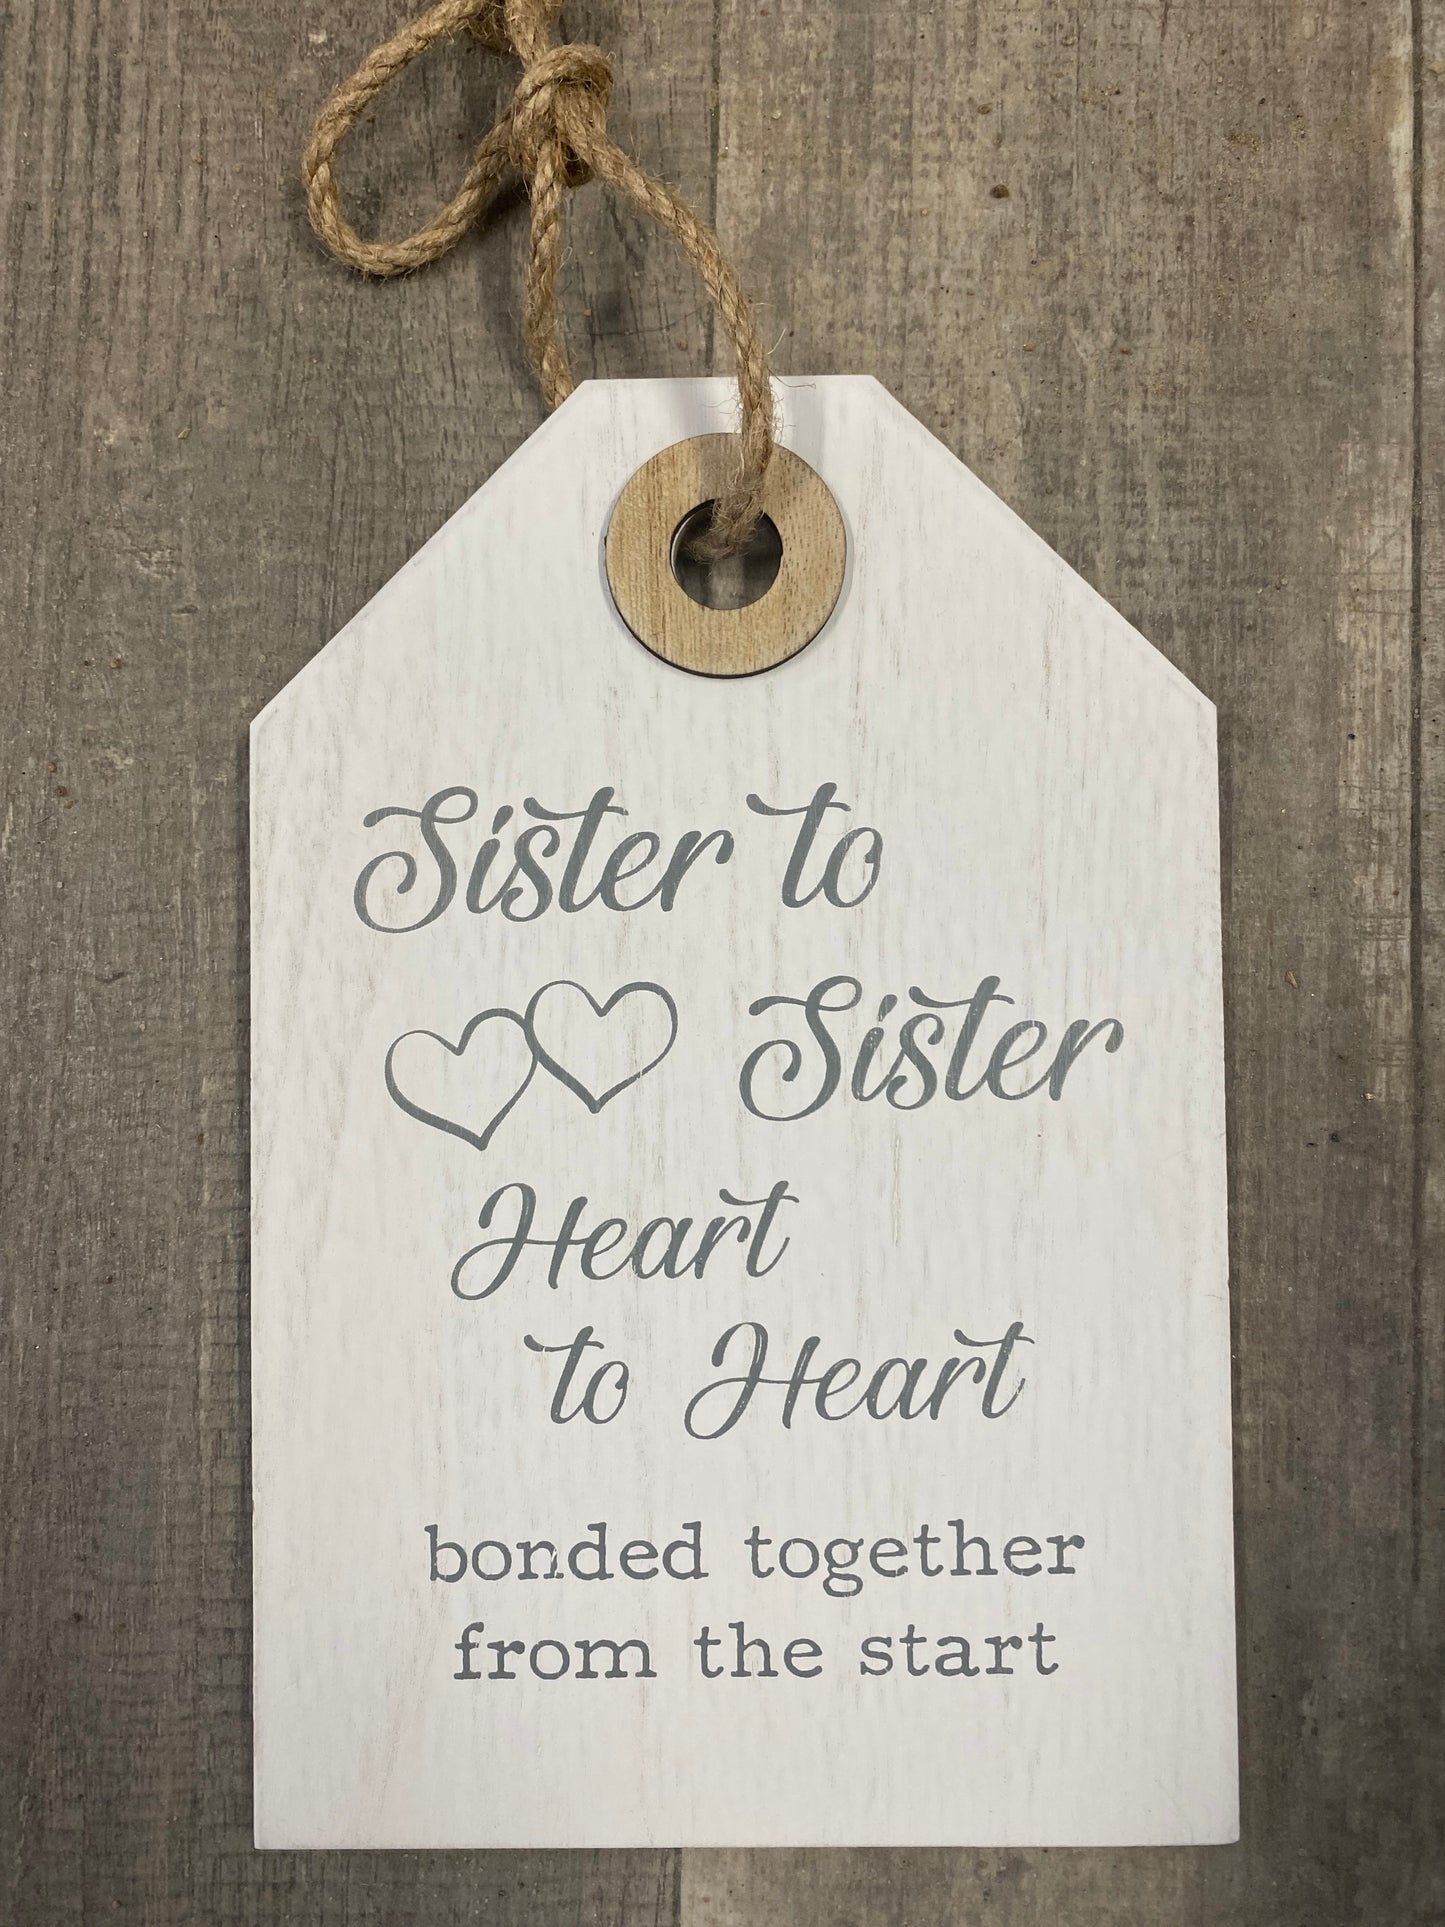 Mom, Grandmother and Sister Wall Signs, Three Assorted